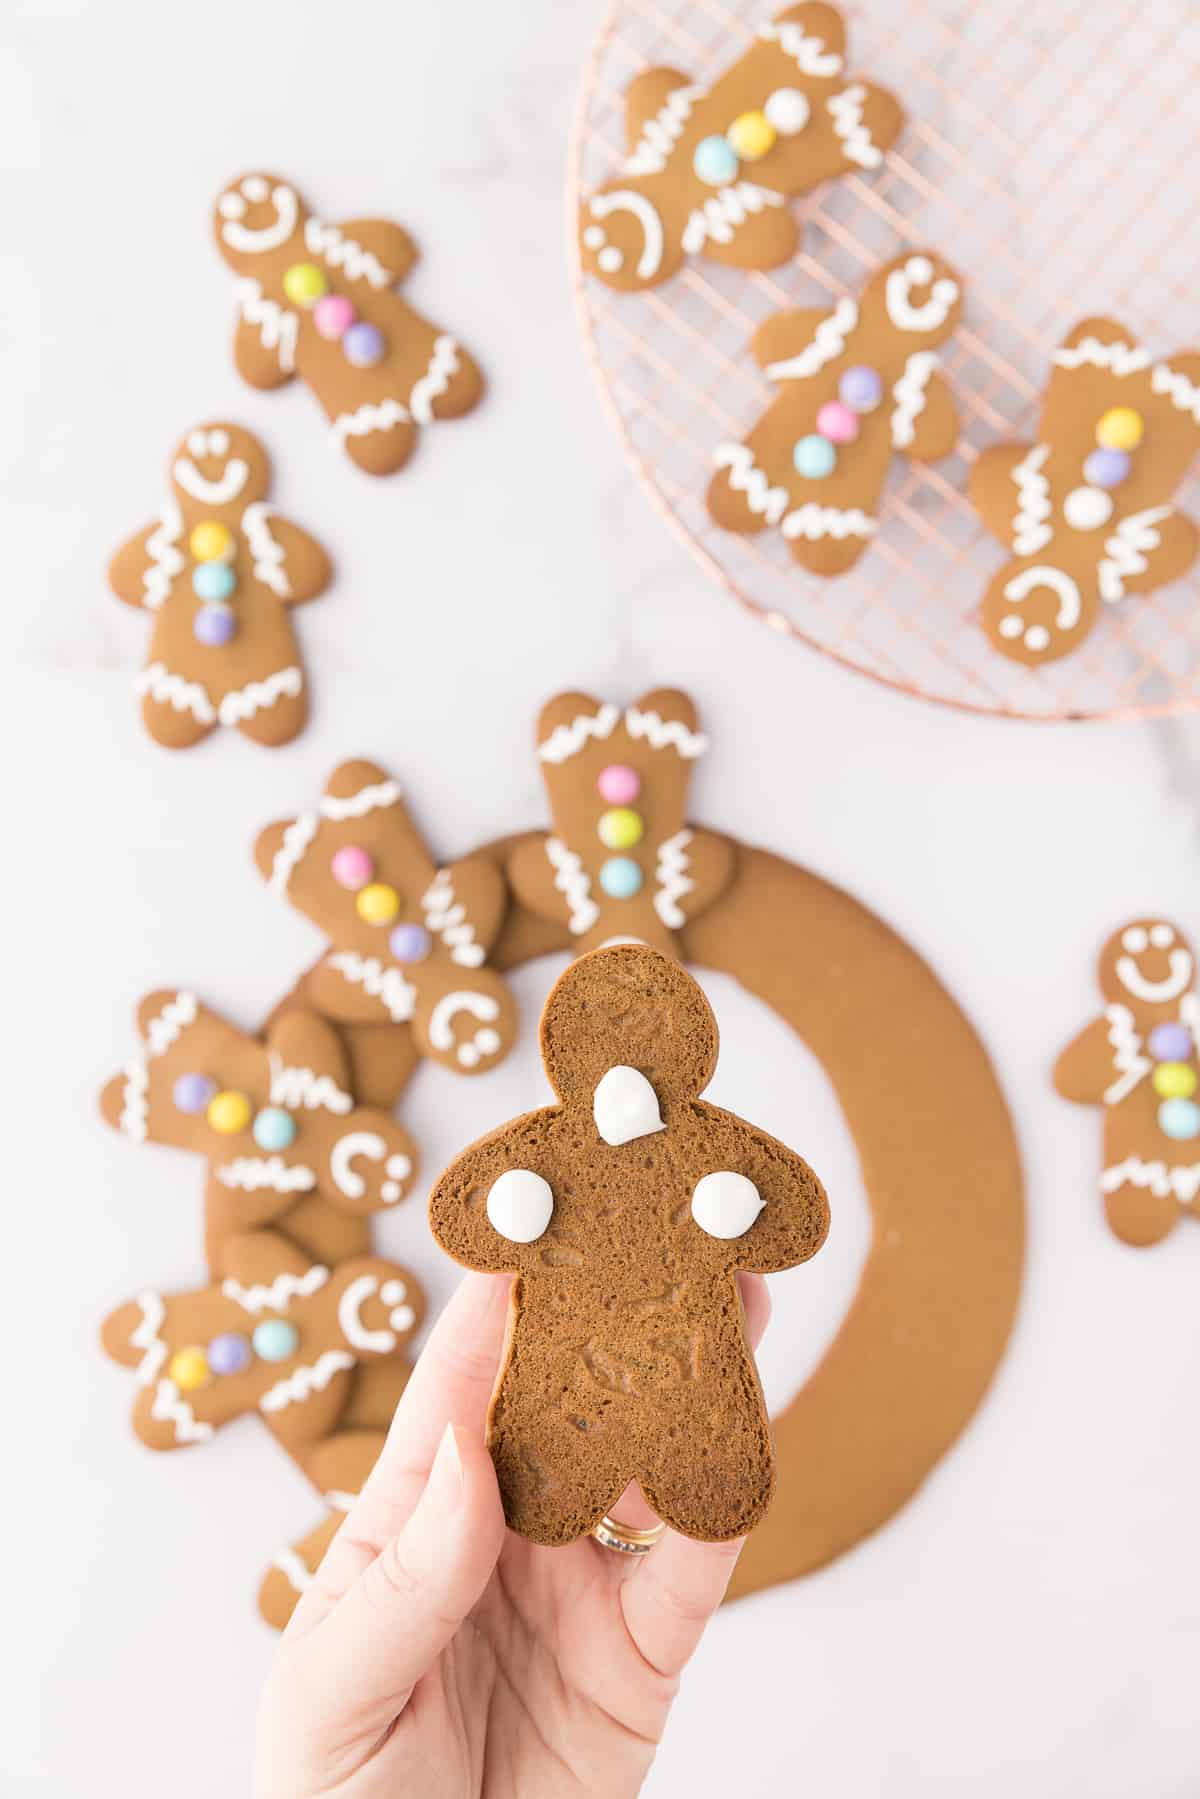 Adding dollops of royal icing to the back of the gingerbread man to secure on the wreath. 